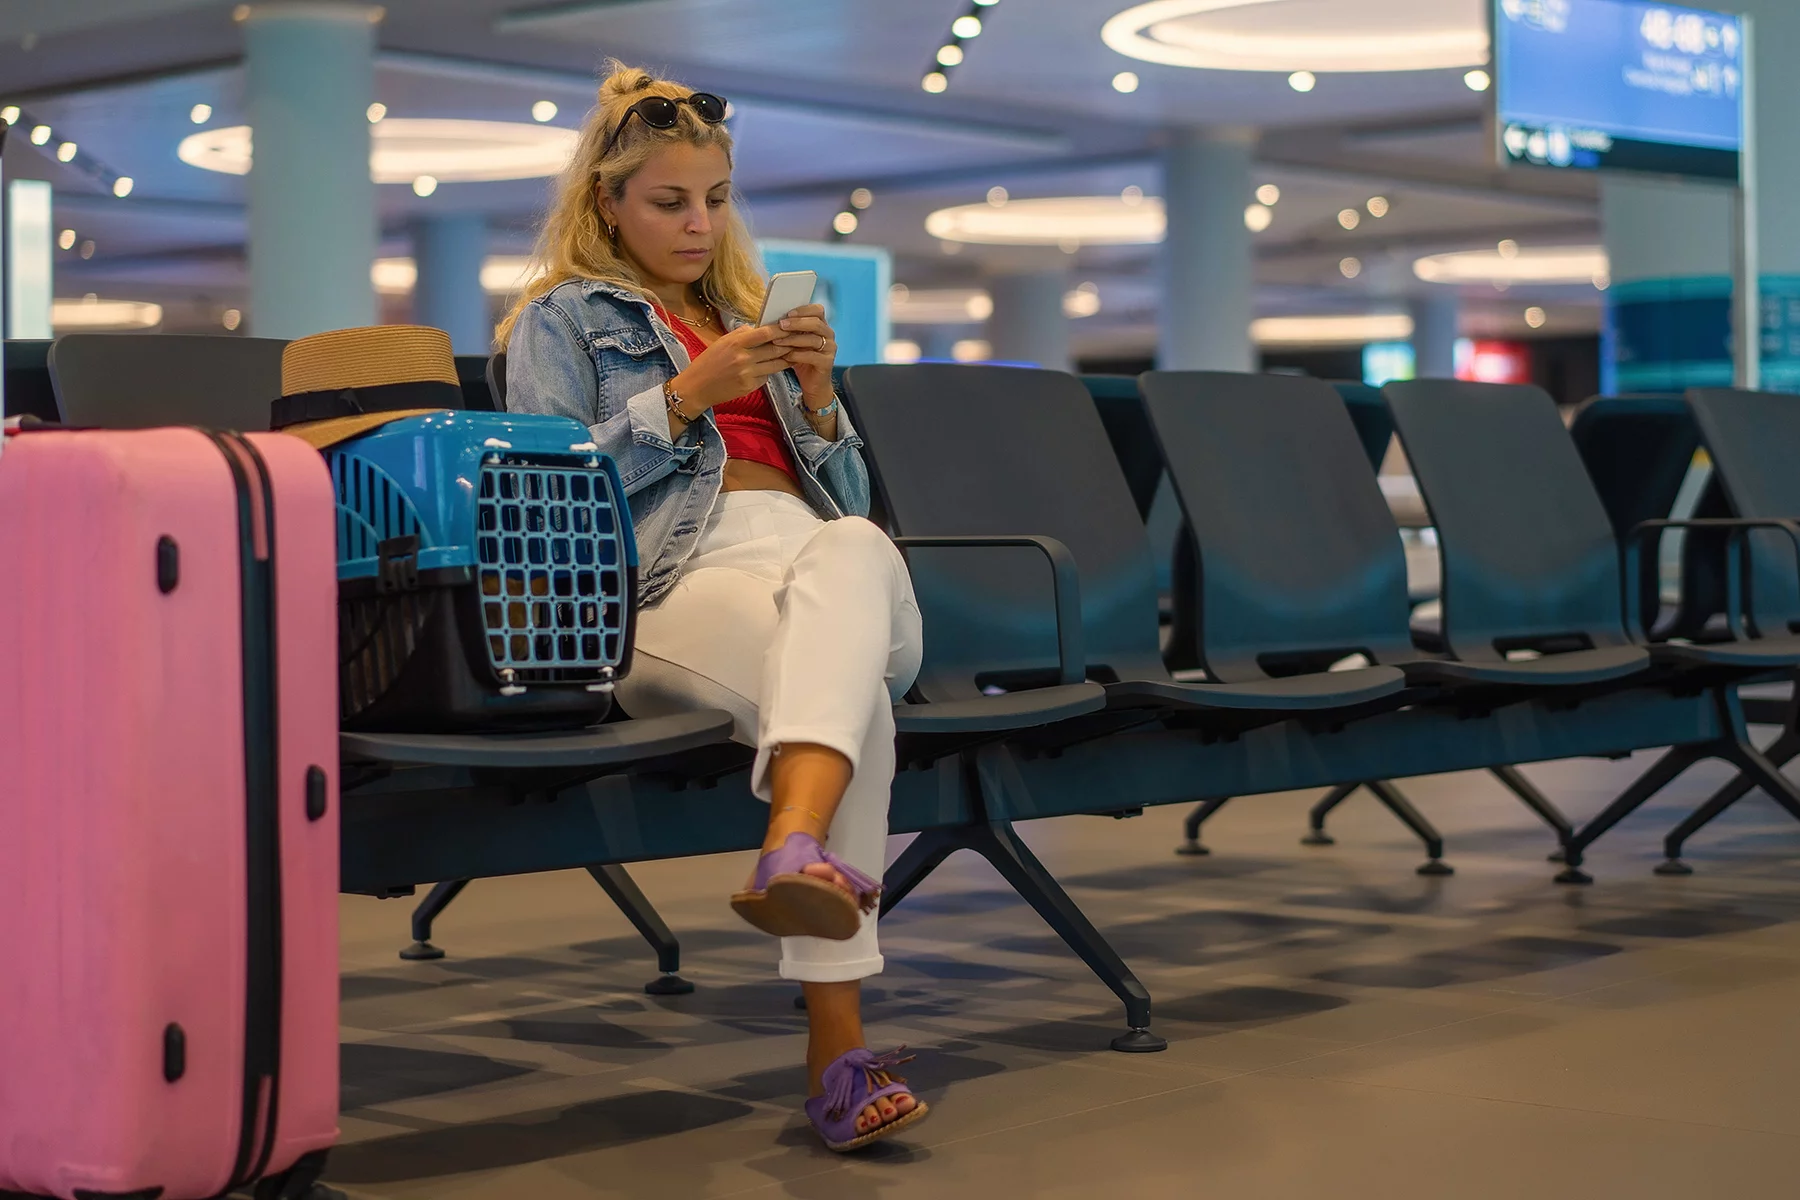 Woman travelling with pet waits in airport lounge, looking at her phone